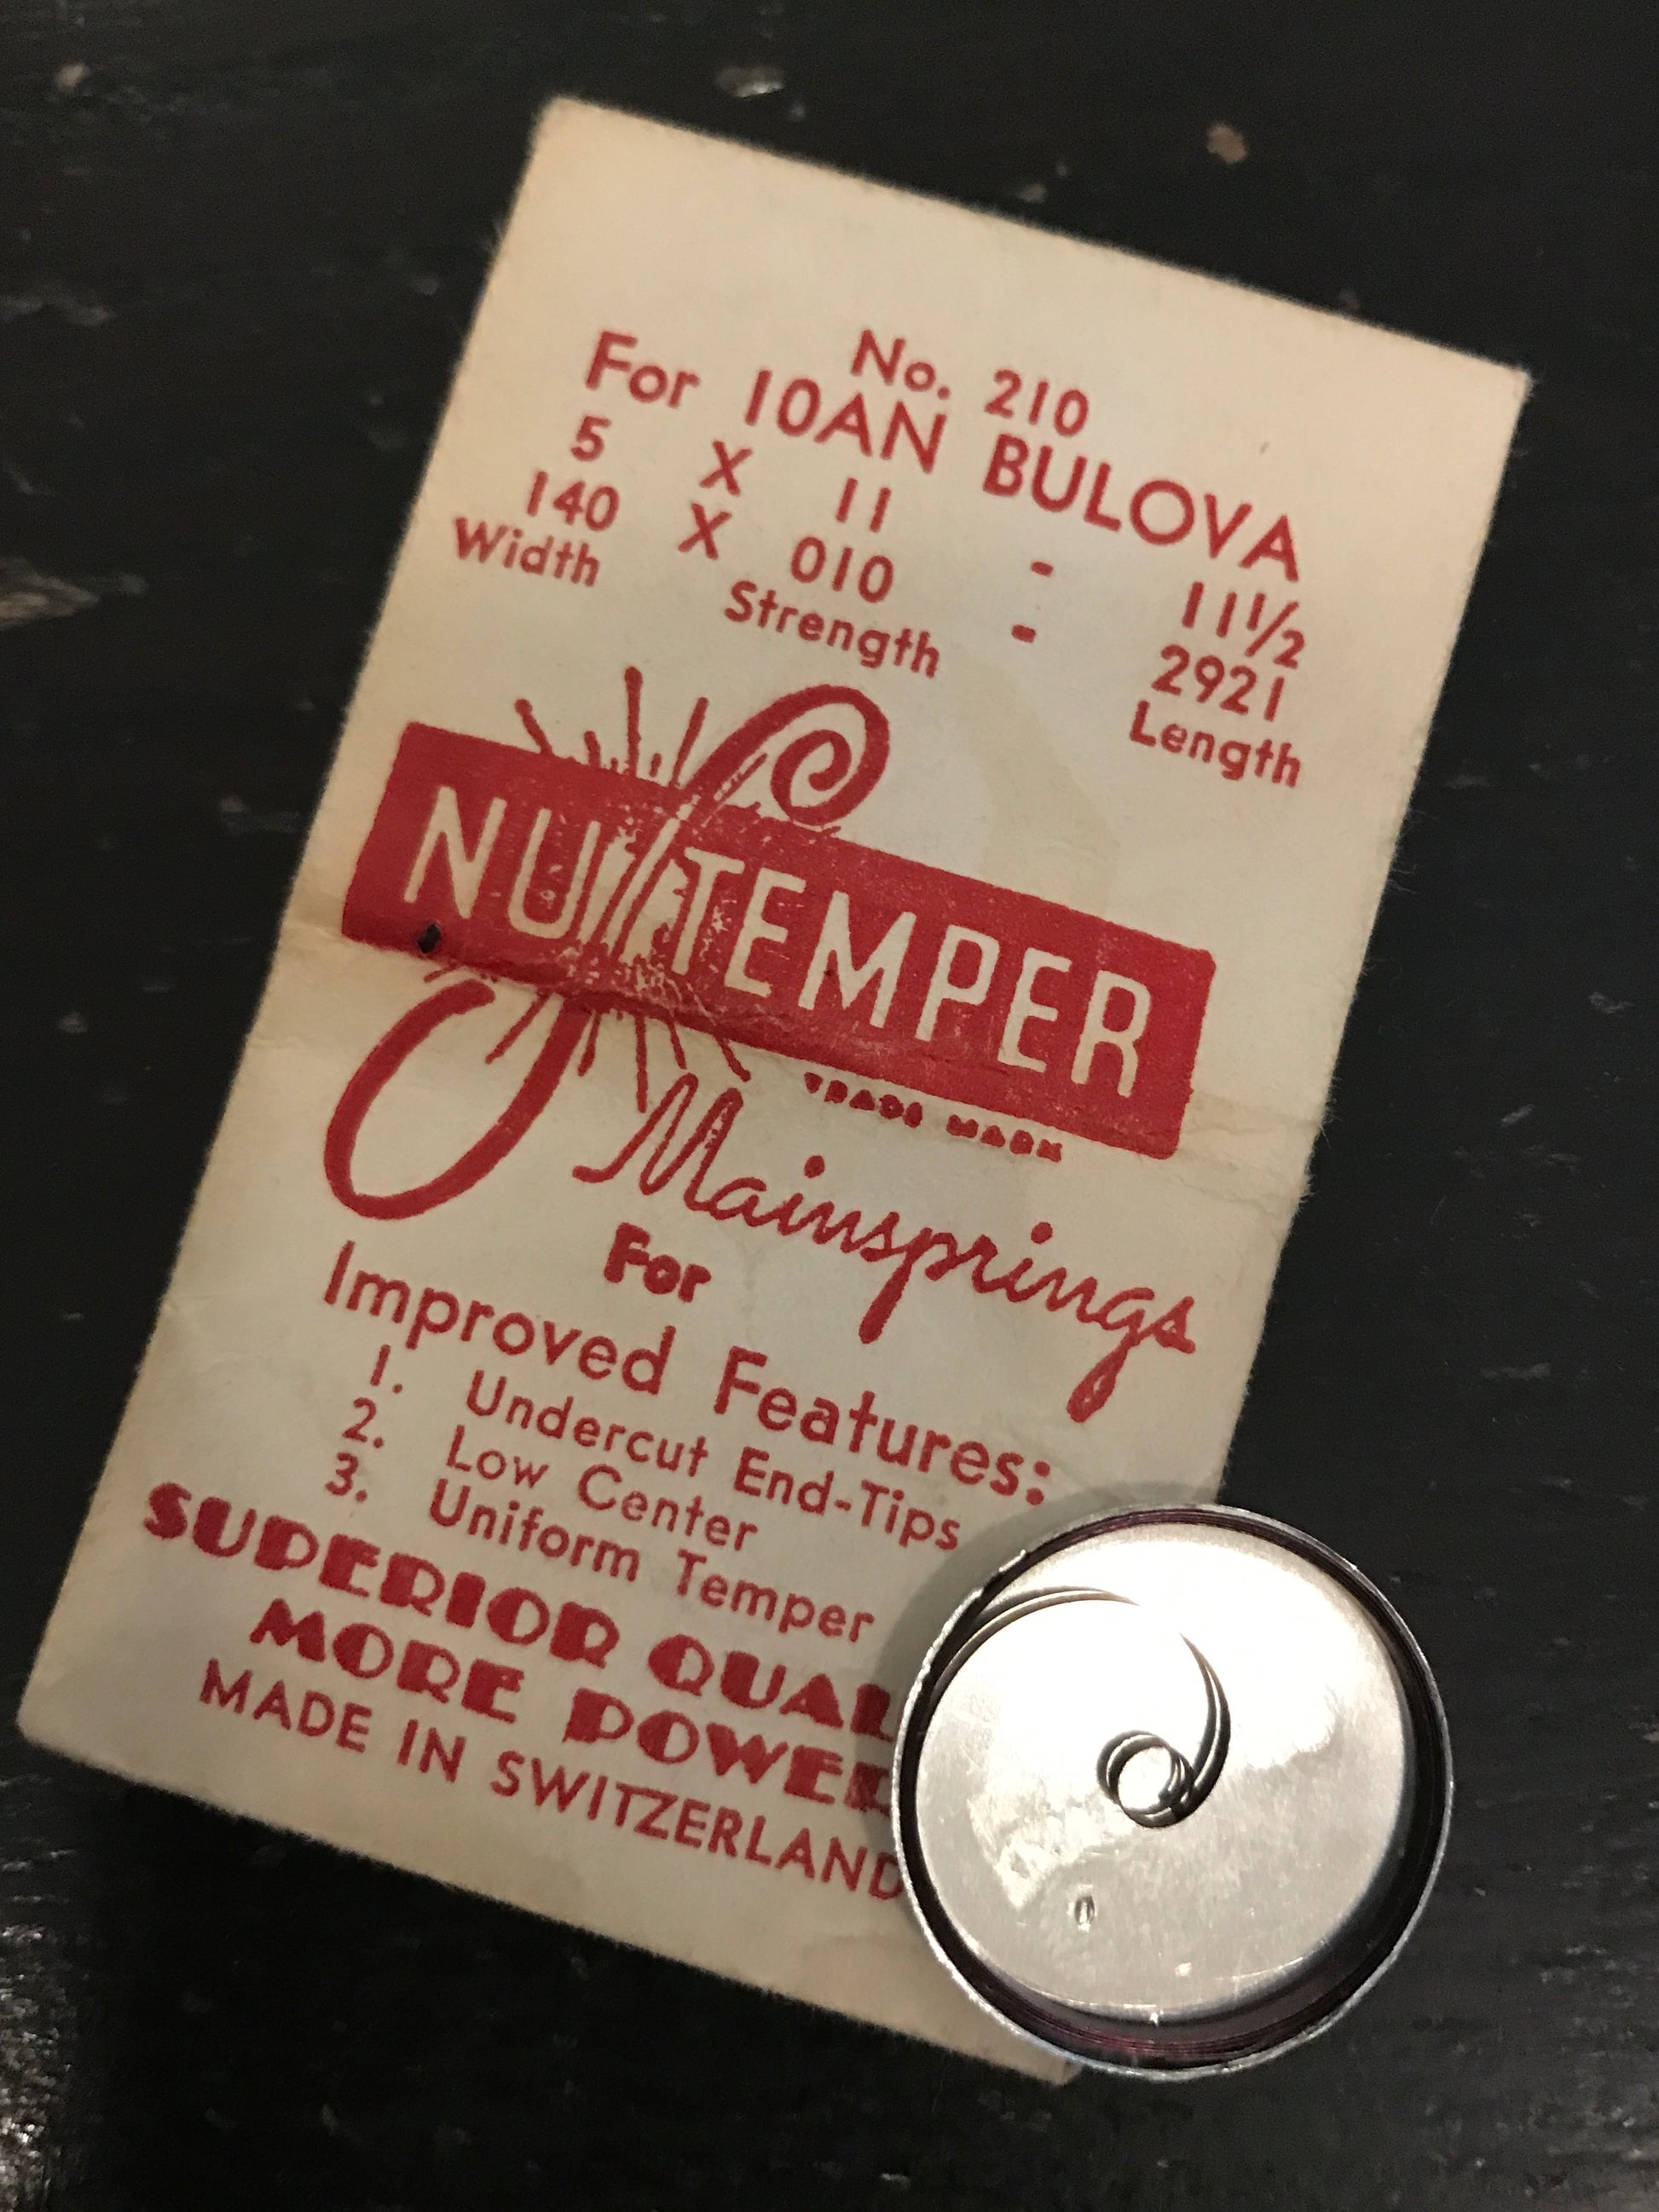 NuTemper Mainspring No. 210 for Bulova 10AN movements - steel